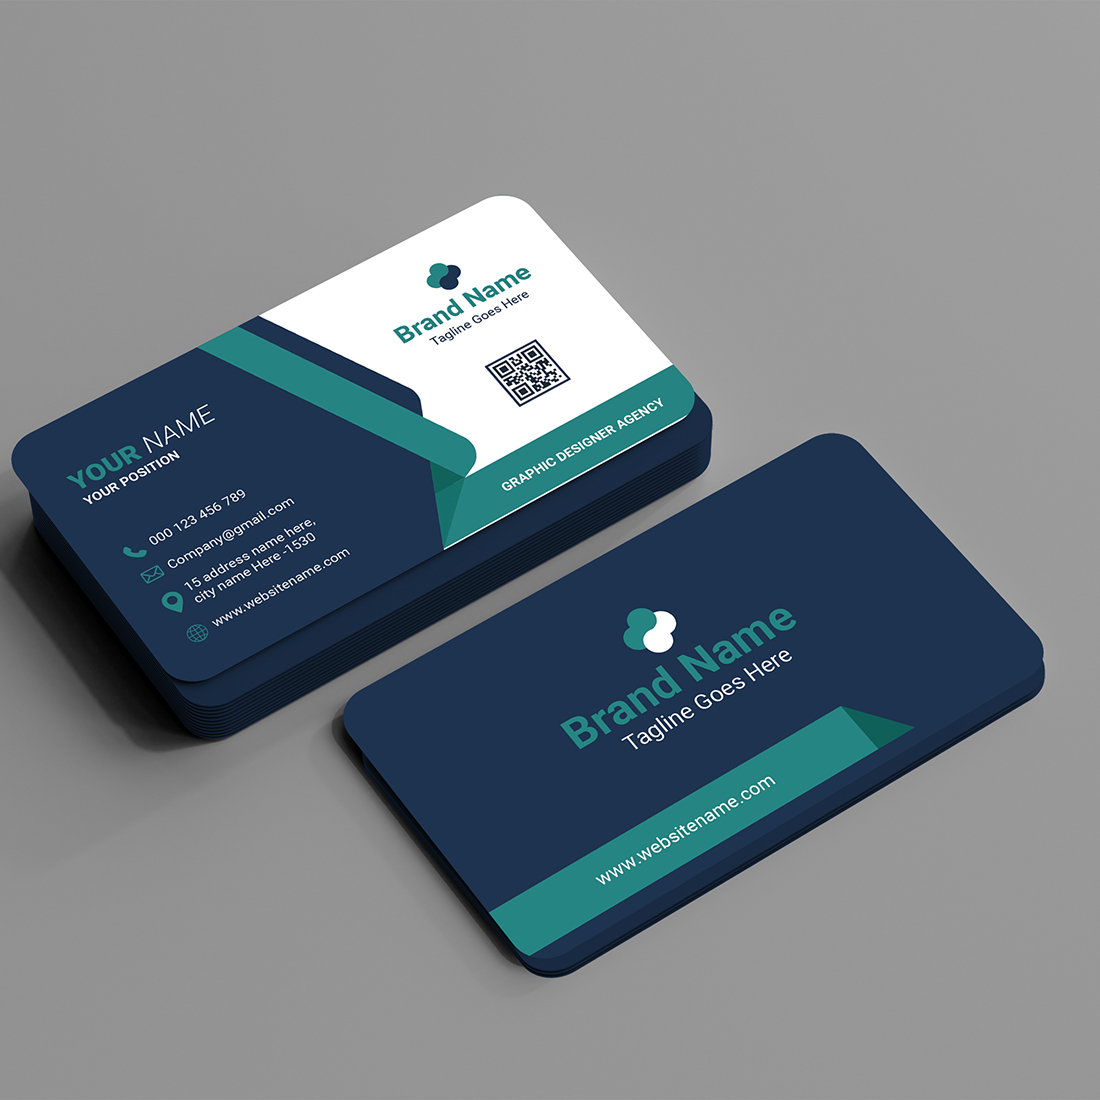 Business card designed to look like a business card.